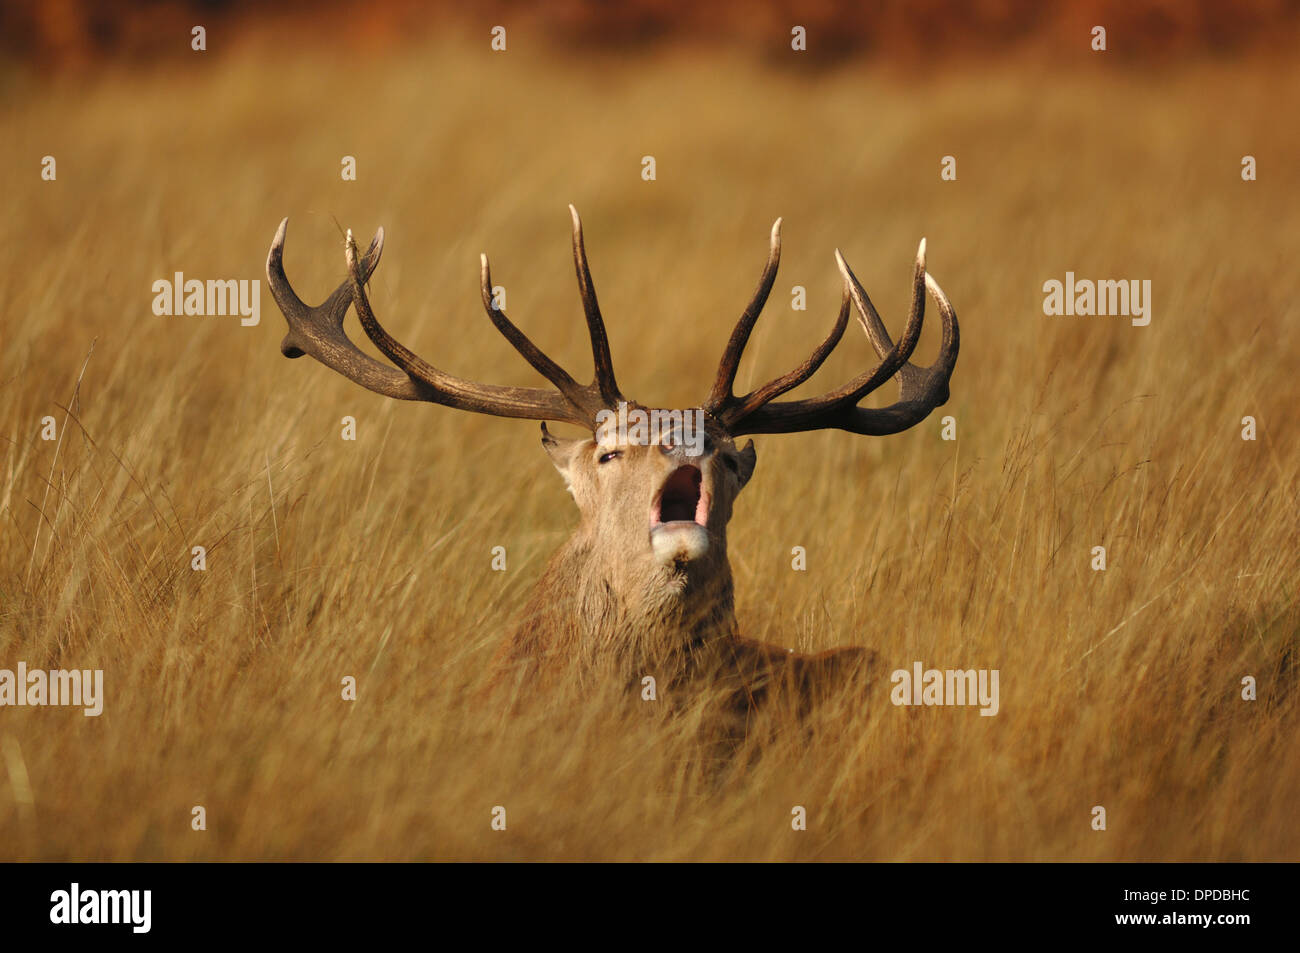 A stage roaring with a full set of antlers UK Stock Photo